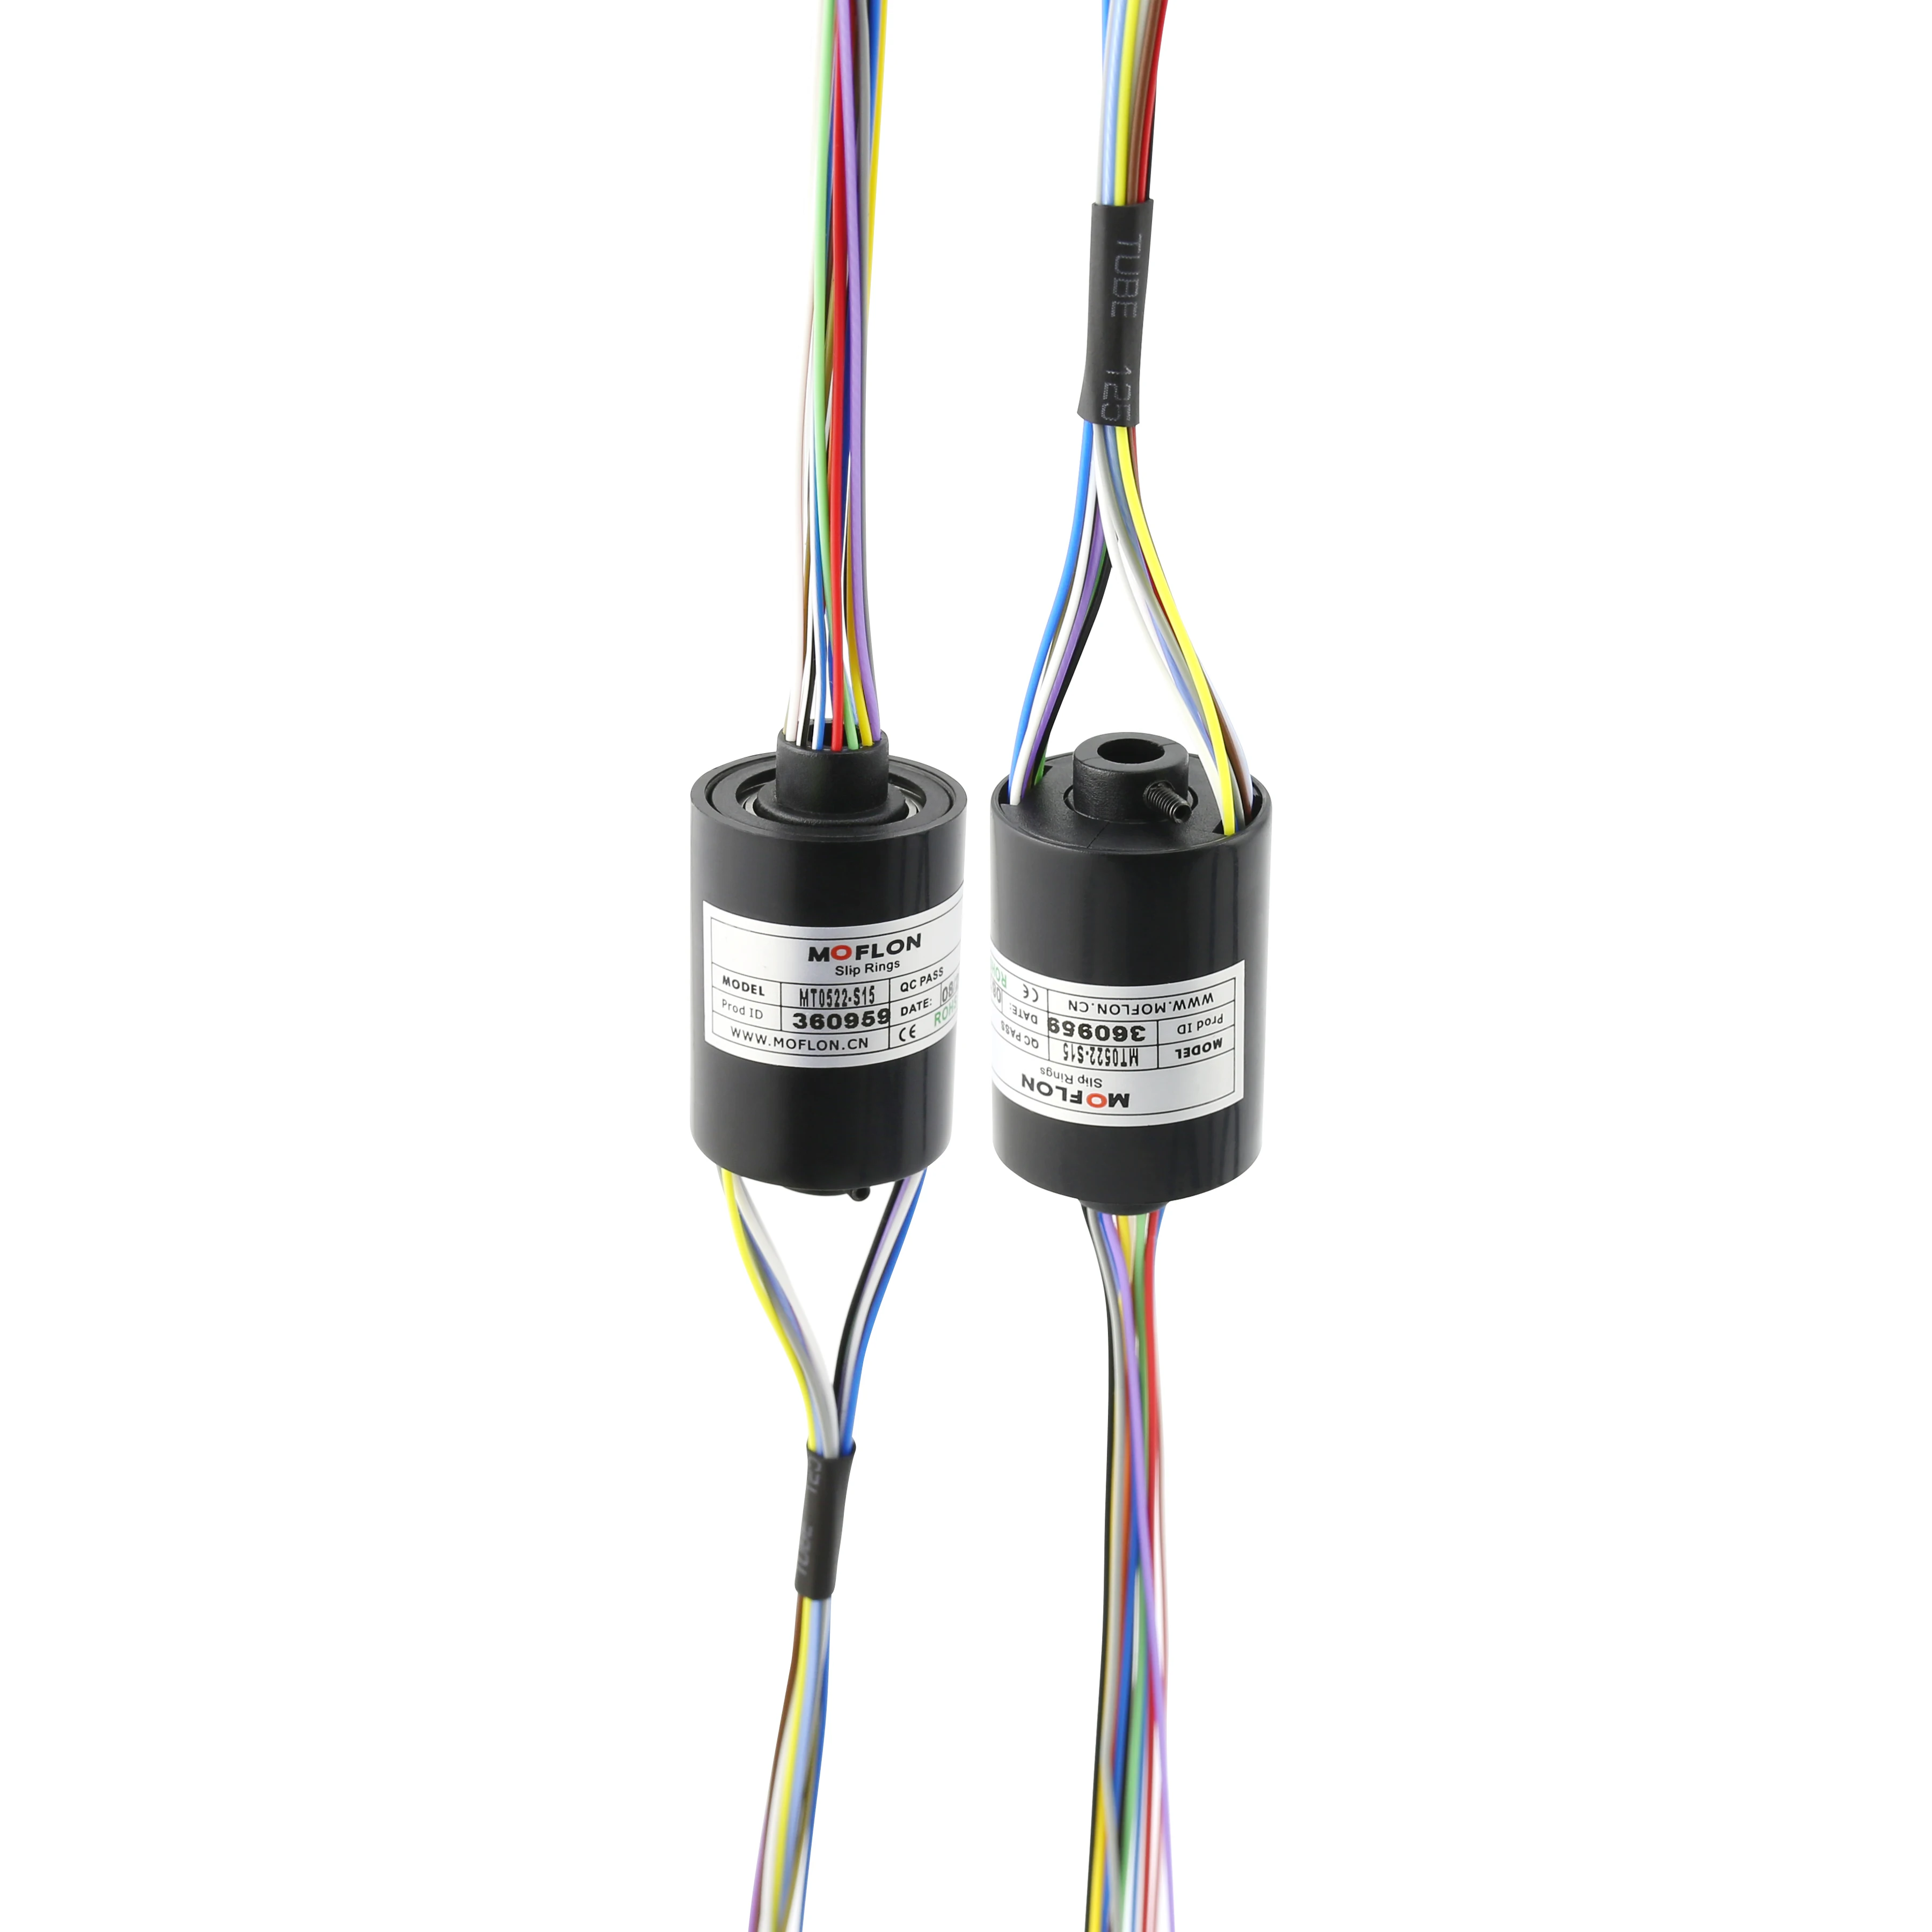 MT1233 SLIP RINGS WITH BORE SIZE 12.7mm ,6 wires/5A each,MOFLON slip ring 0.5'' 